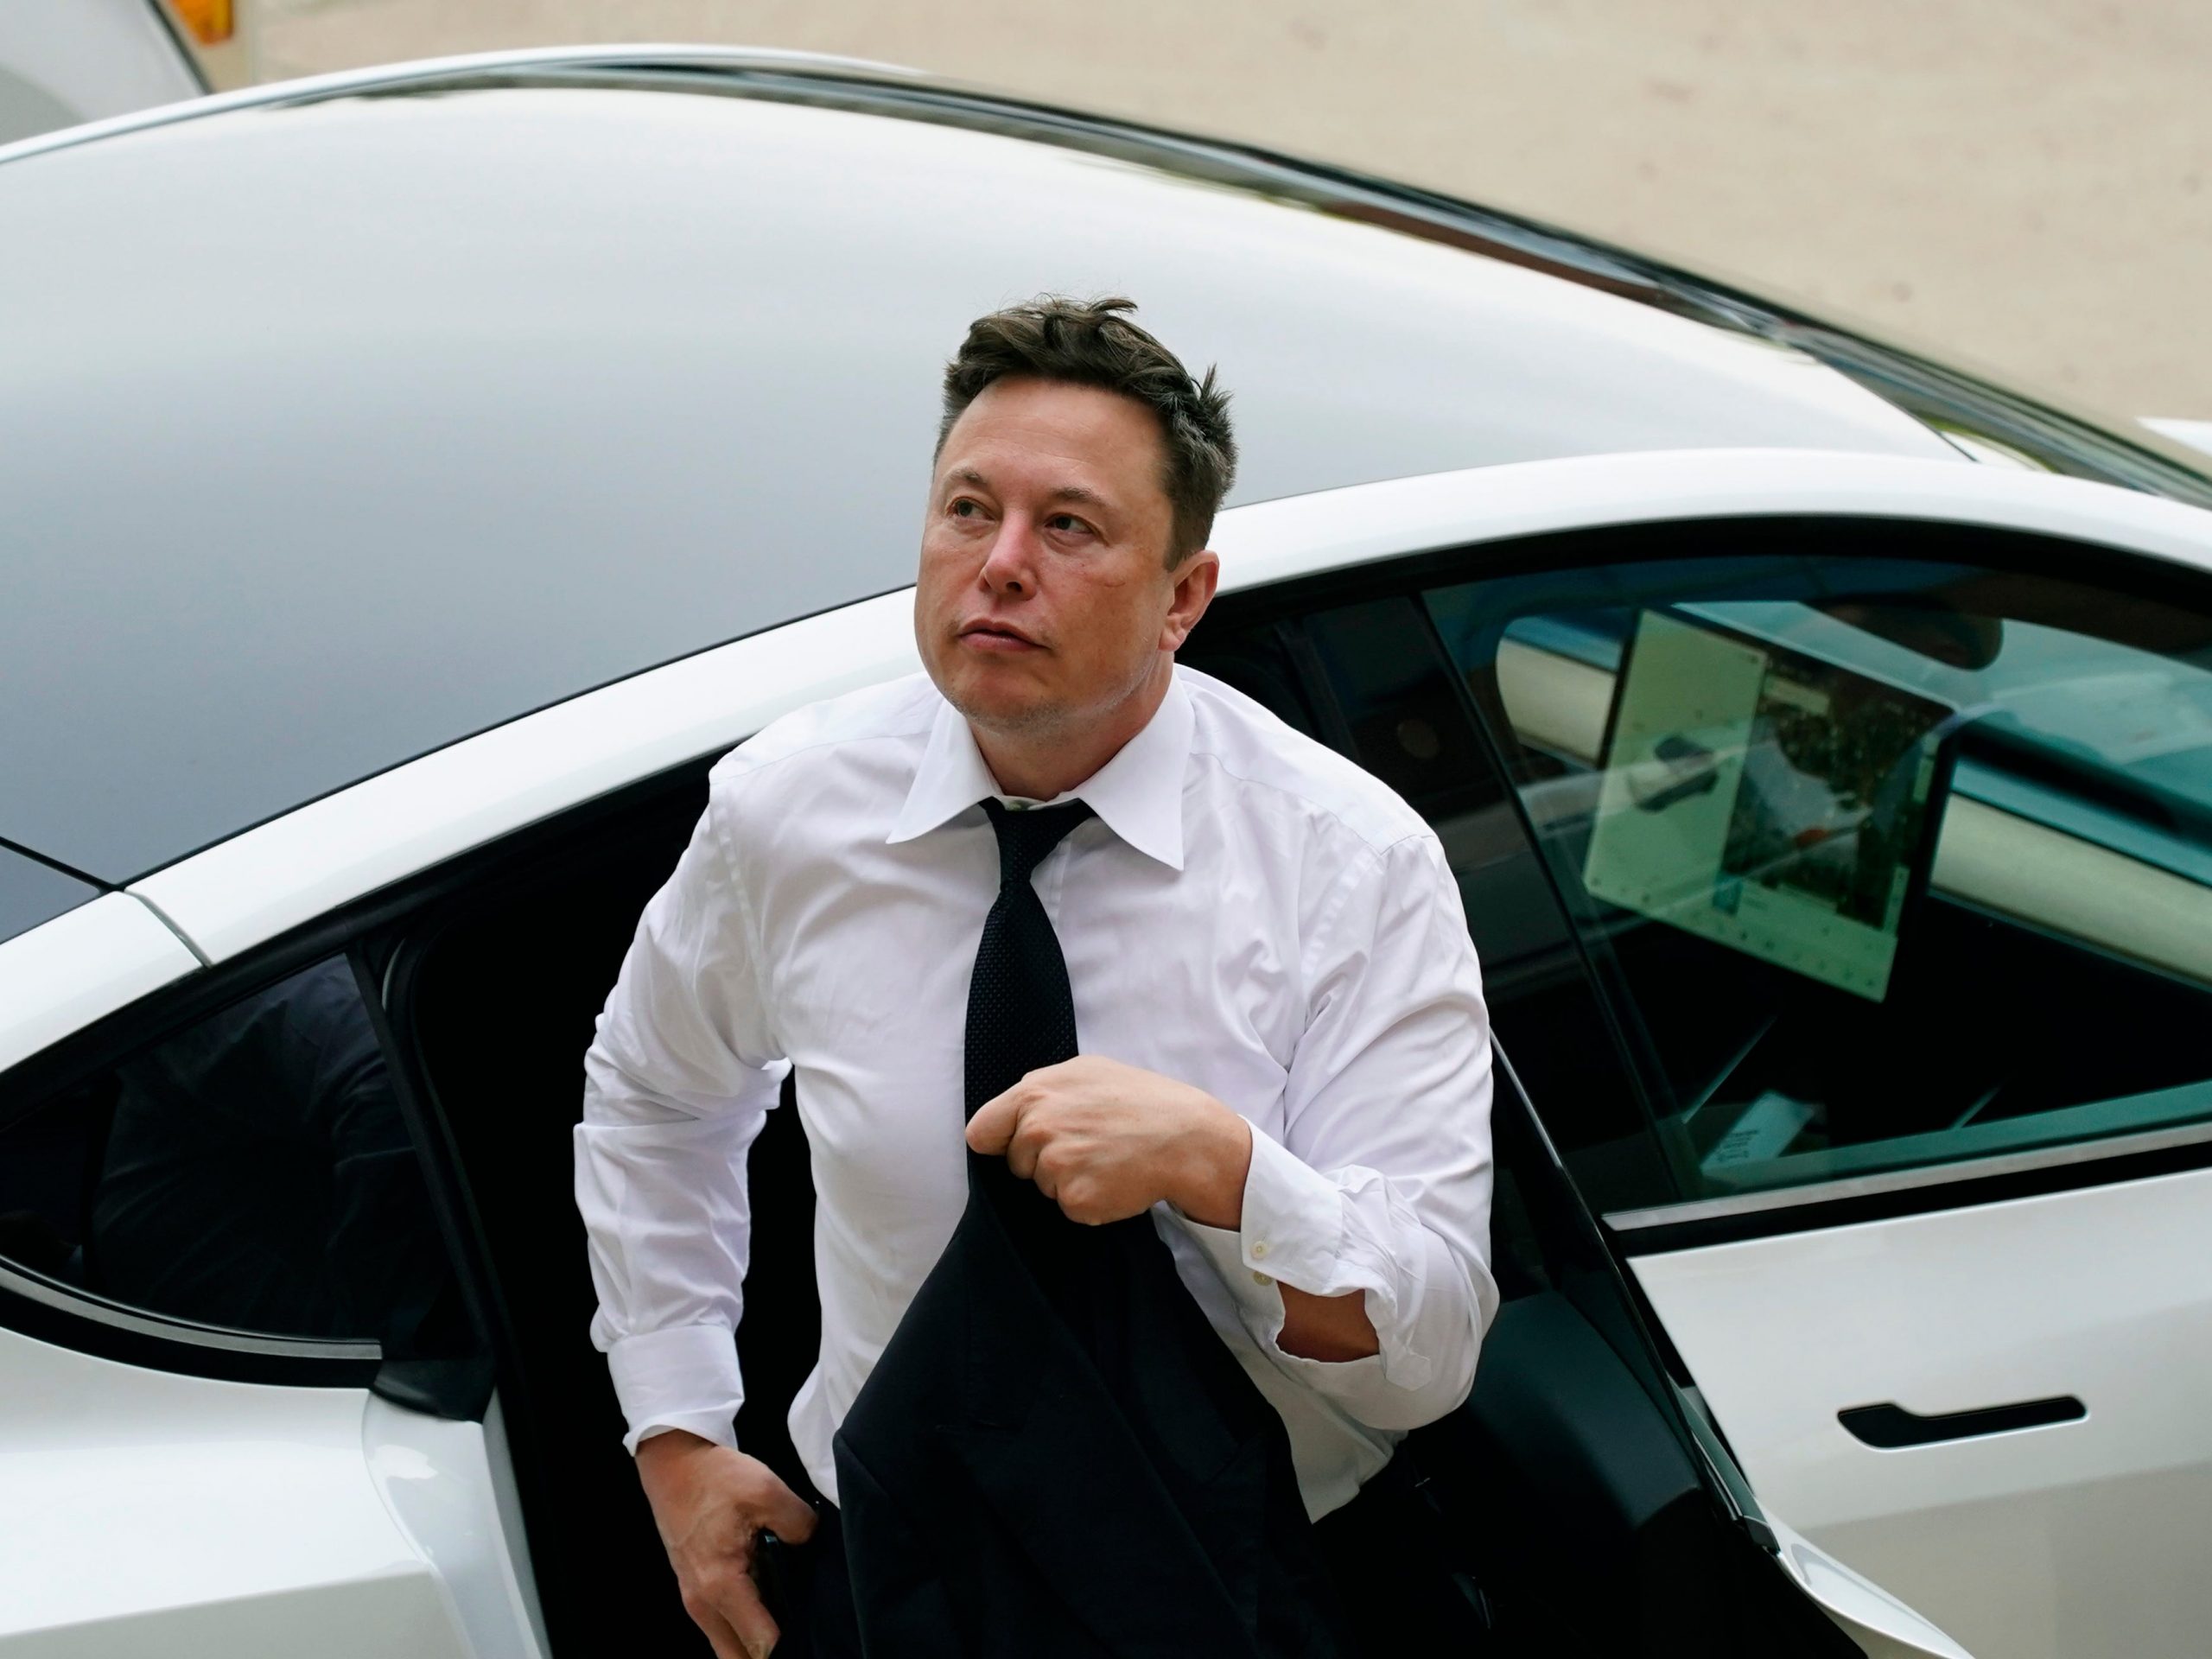 Tesla CEO Elon Musk in a white shirt and tie exits the backseat of a white Tesla